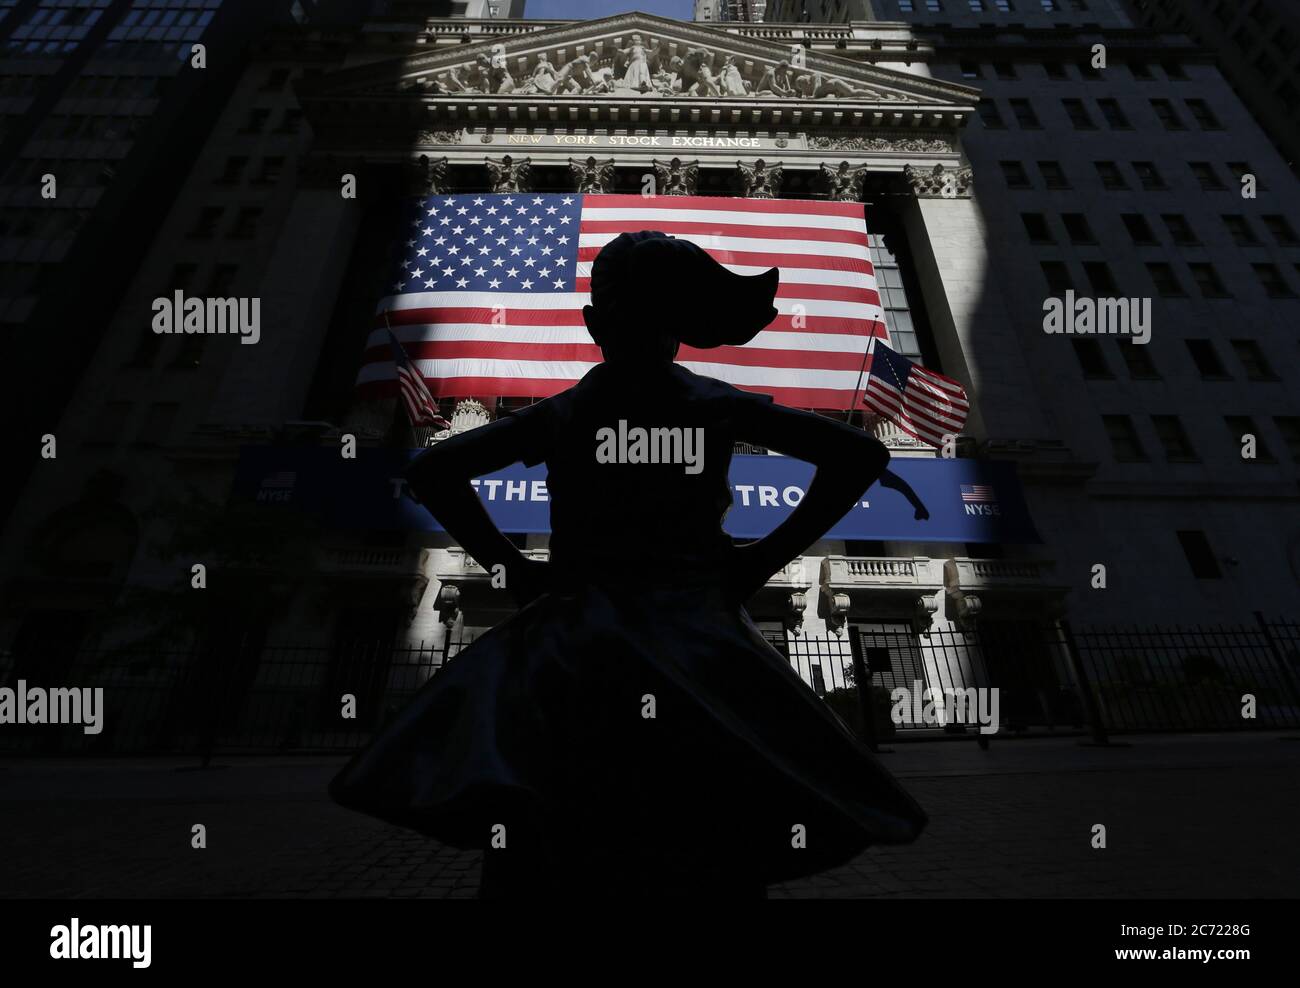 New York, United States. 13th July, 2020. The Fearless Girl Statue faces a giant American Flag that hangs outside of The New York Stock Exchange just after the opening bell on Wall Street in New York City on Monday, July 13, 2020. The Dow Jones Industrial Average was up over 400 points half way through the trading day even though there is coronavirus spike in some parts of the country. Photo by John Angelillo/UPI Credit: UPI/Alamy Live News Stock Photo